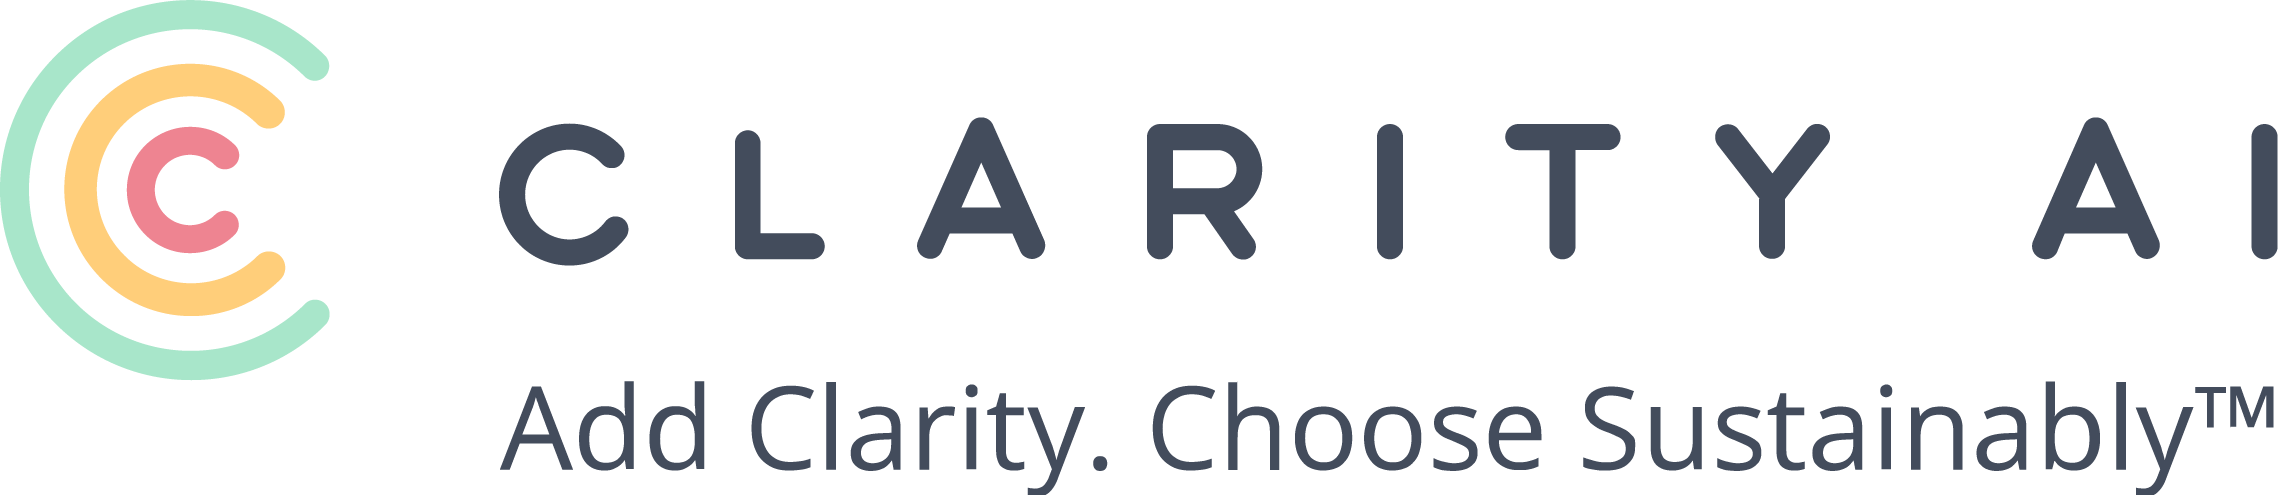 Clarity AI logo with "add clarity. Choose sustainably" written underneath